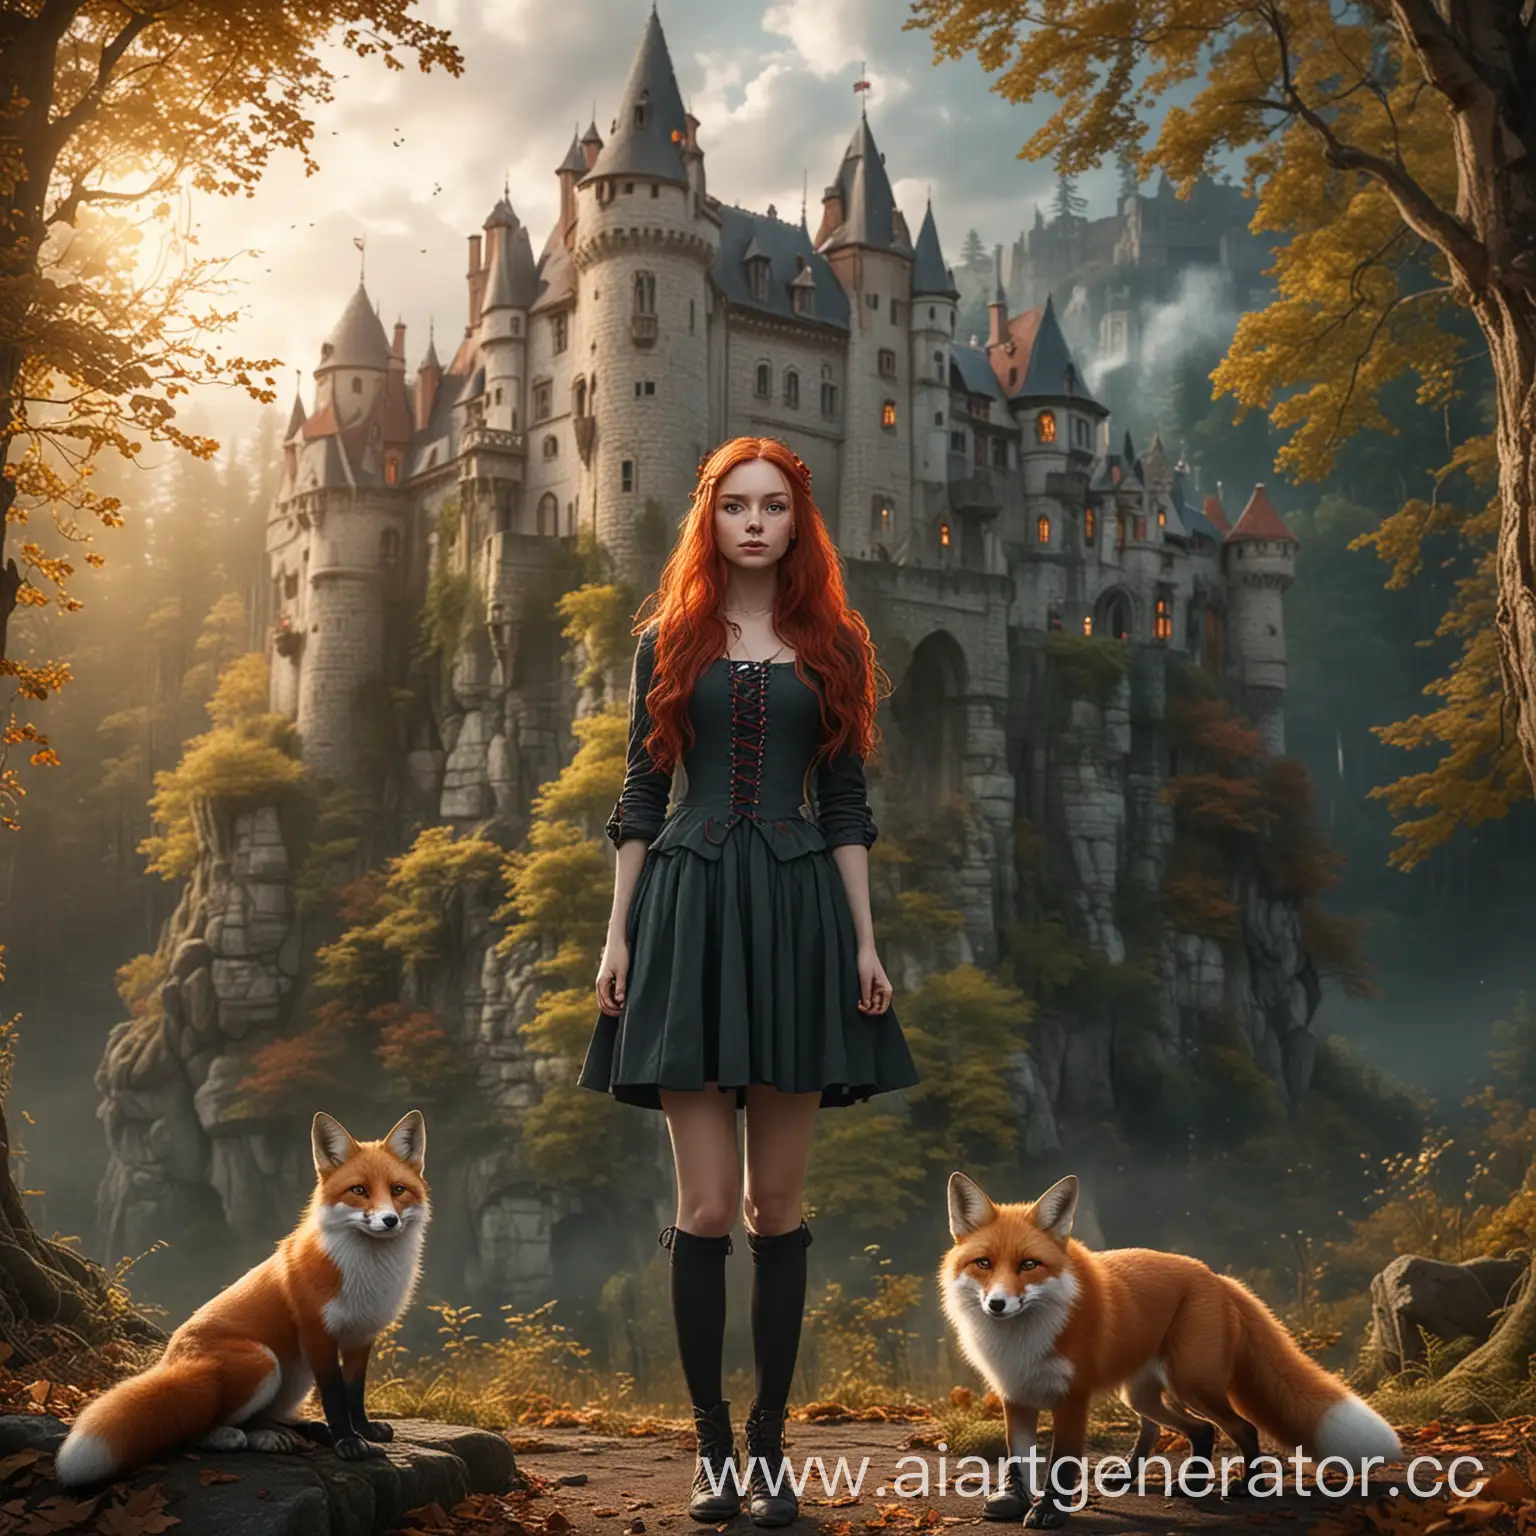 RedHaired-Girl-and-Fox-in-Enchanted-Forest-Castle-Scene